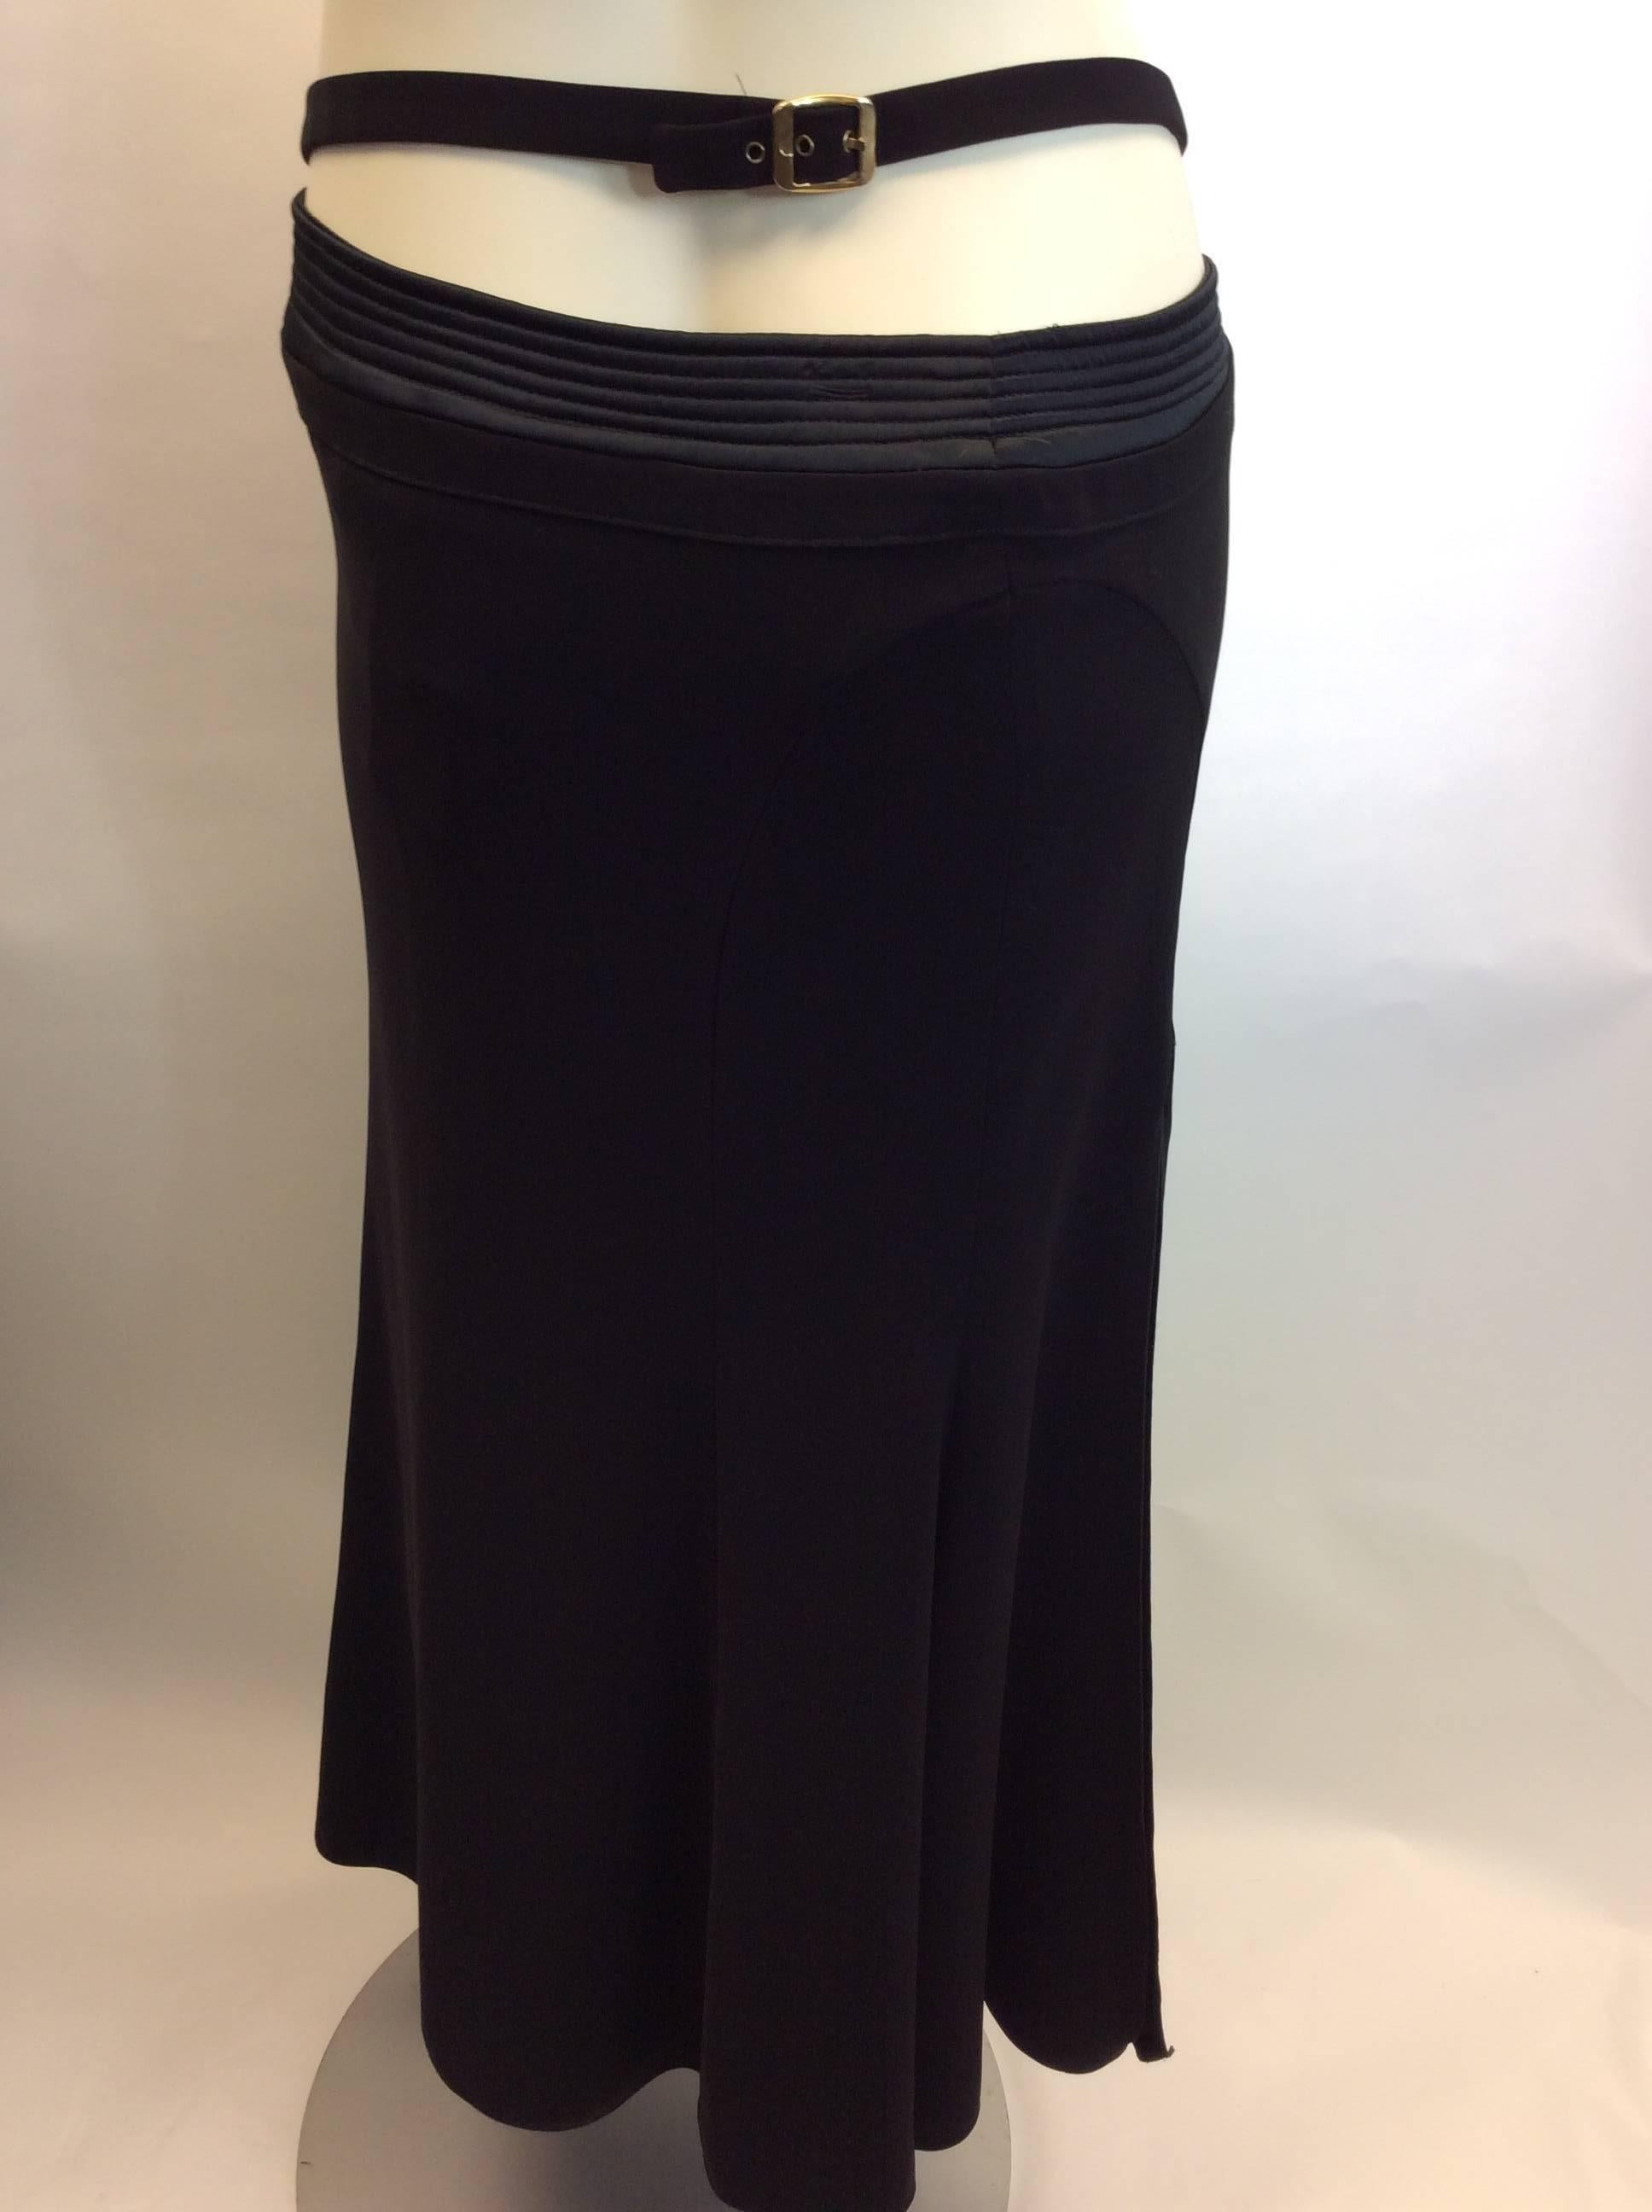 Versace Maxi Belted Skirt In Excellent Condition For Sale In Narberth, PA